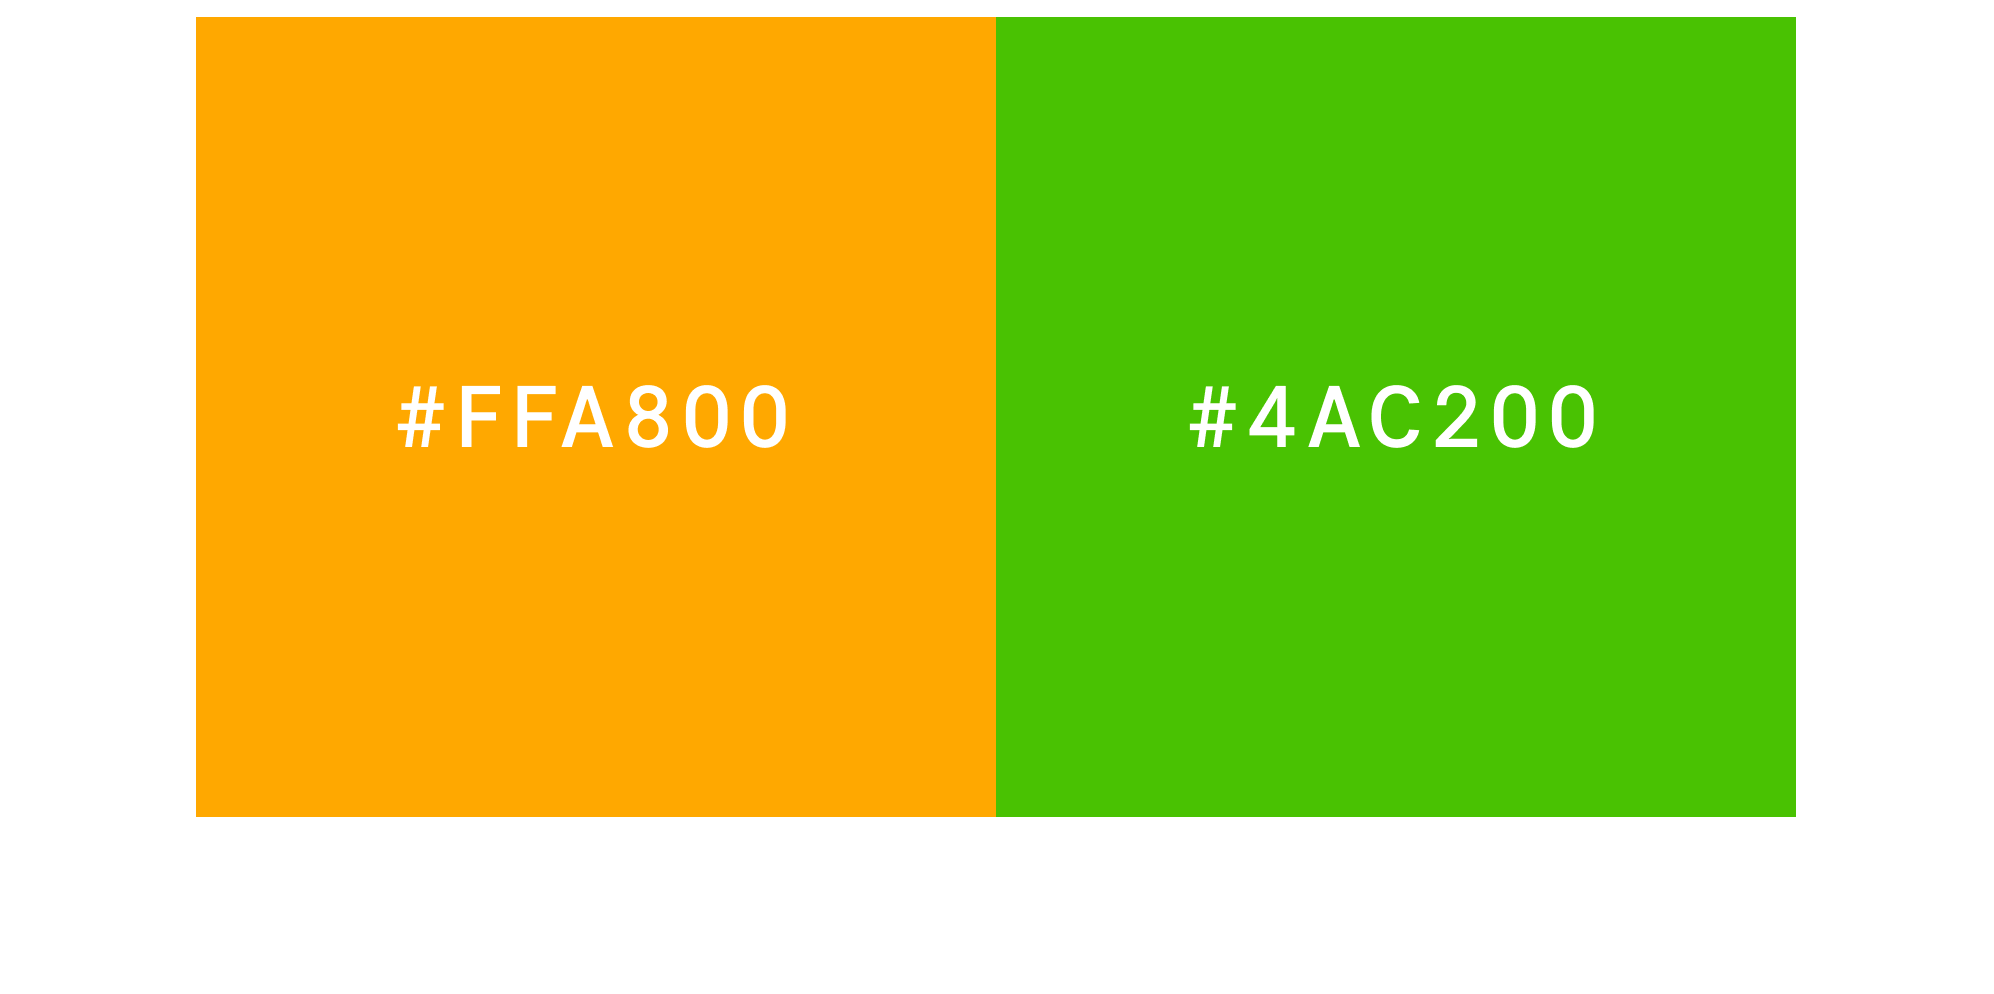 A GIF showing that an individual with protanopia vision may not see differentiation between an orange color (#FFA800) and a green color (#4AC200).